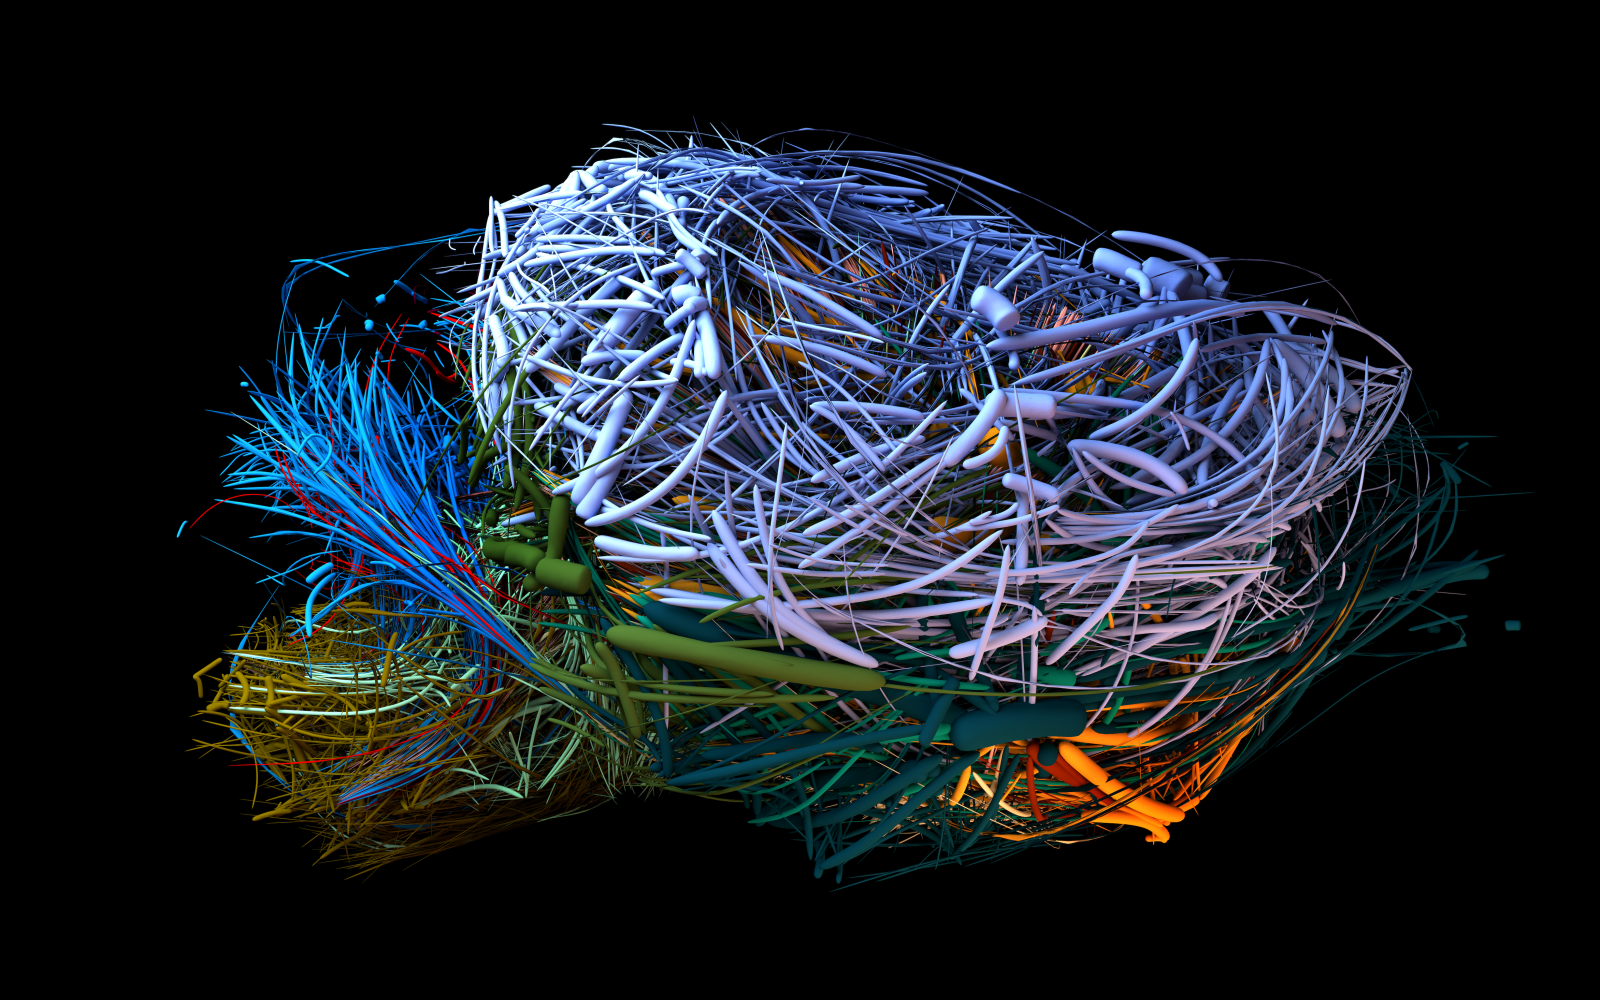 Visualisation of the connectome of a mouse brain in different colours